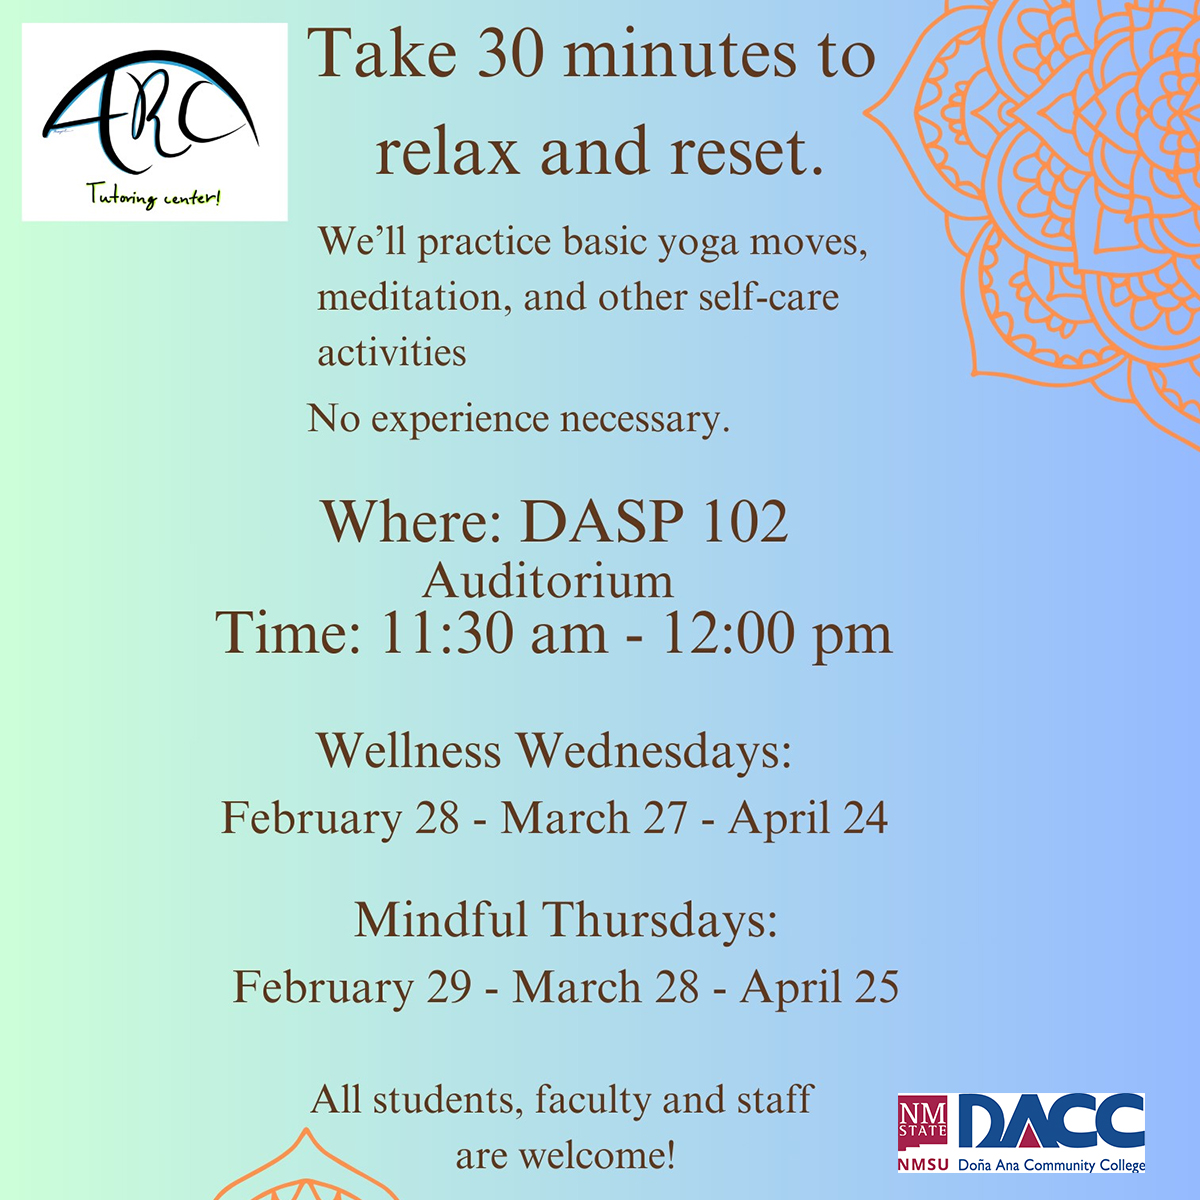 We hope you are having a great semester! If you attend the Sunland Park Campus, then this might interest you. We will practice basic yoga moves, meditation, and other self-care activities. No experience necessary. All students, faculty and staff are welcome. #WeAreDACC